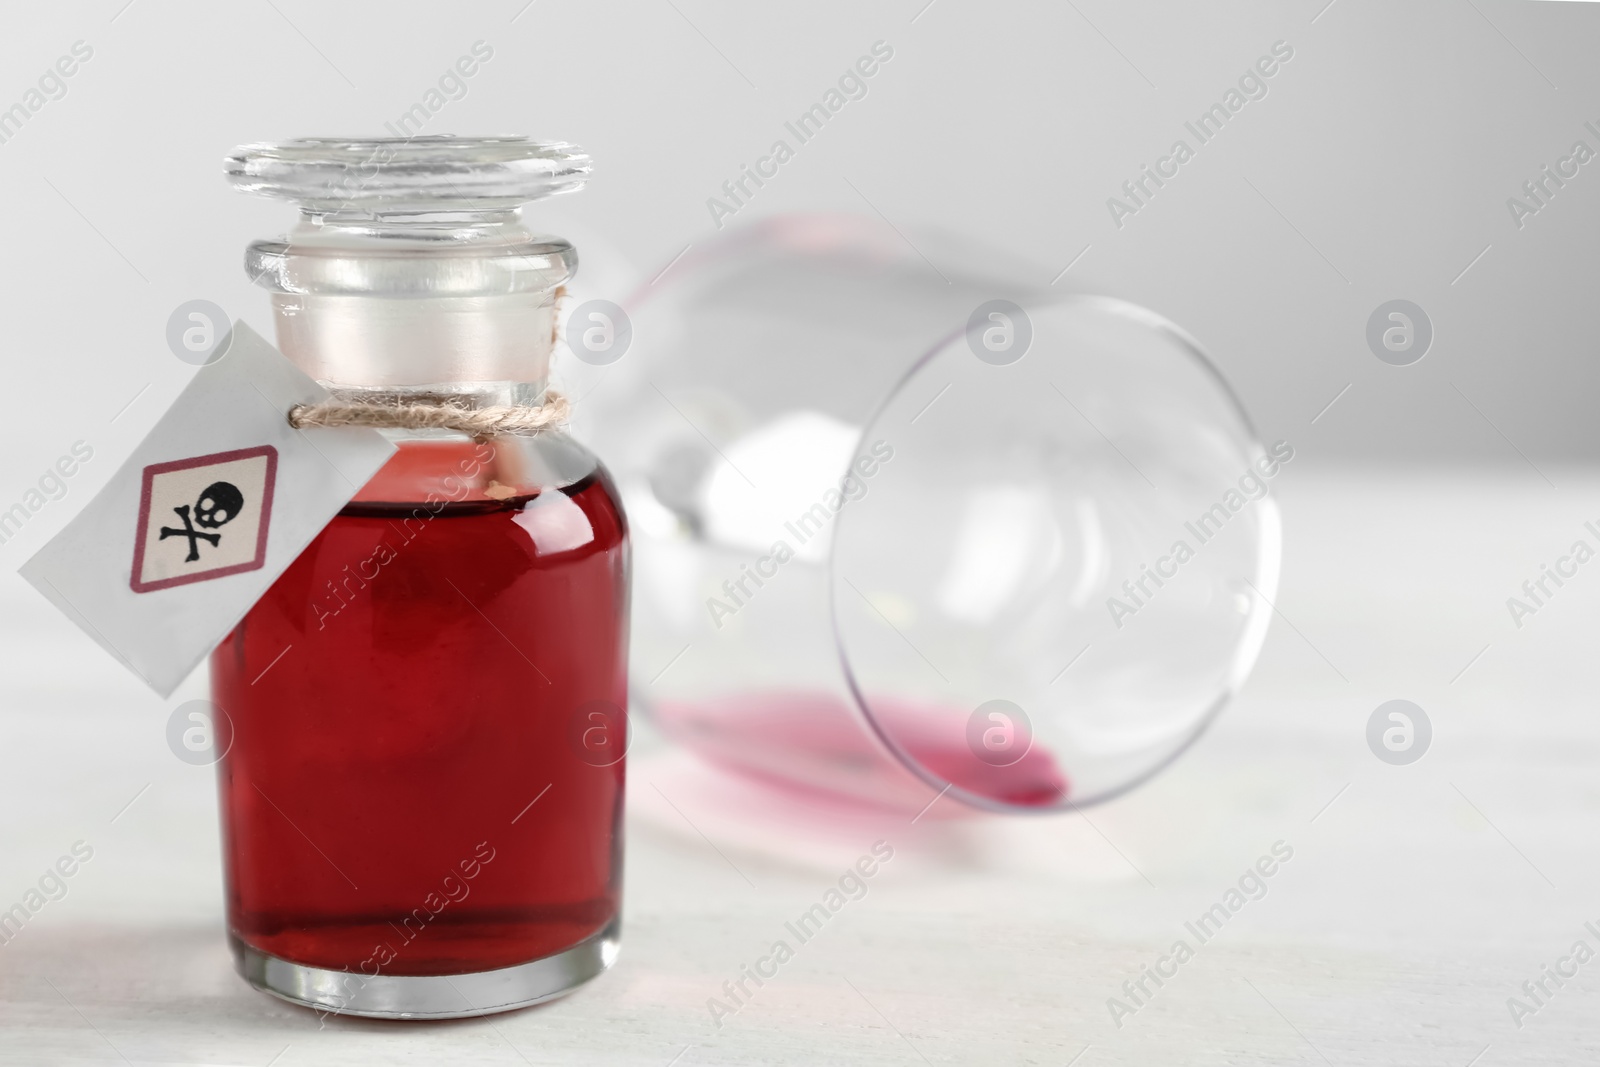 Photo of Bottle of poison and partially emptied glass on light background, closeup. Space for text